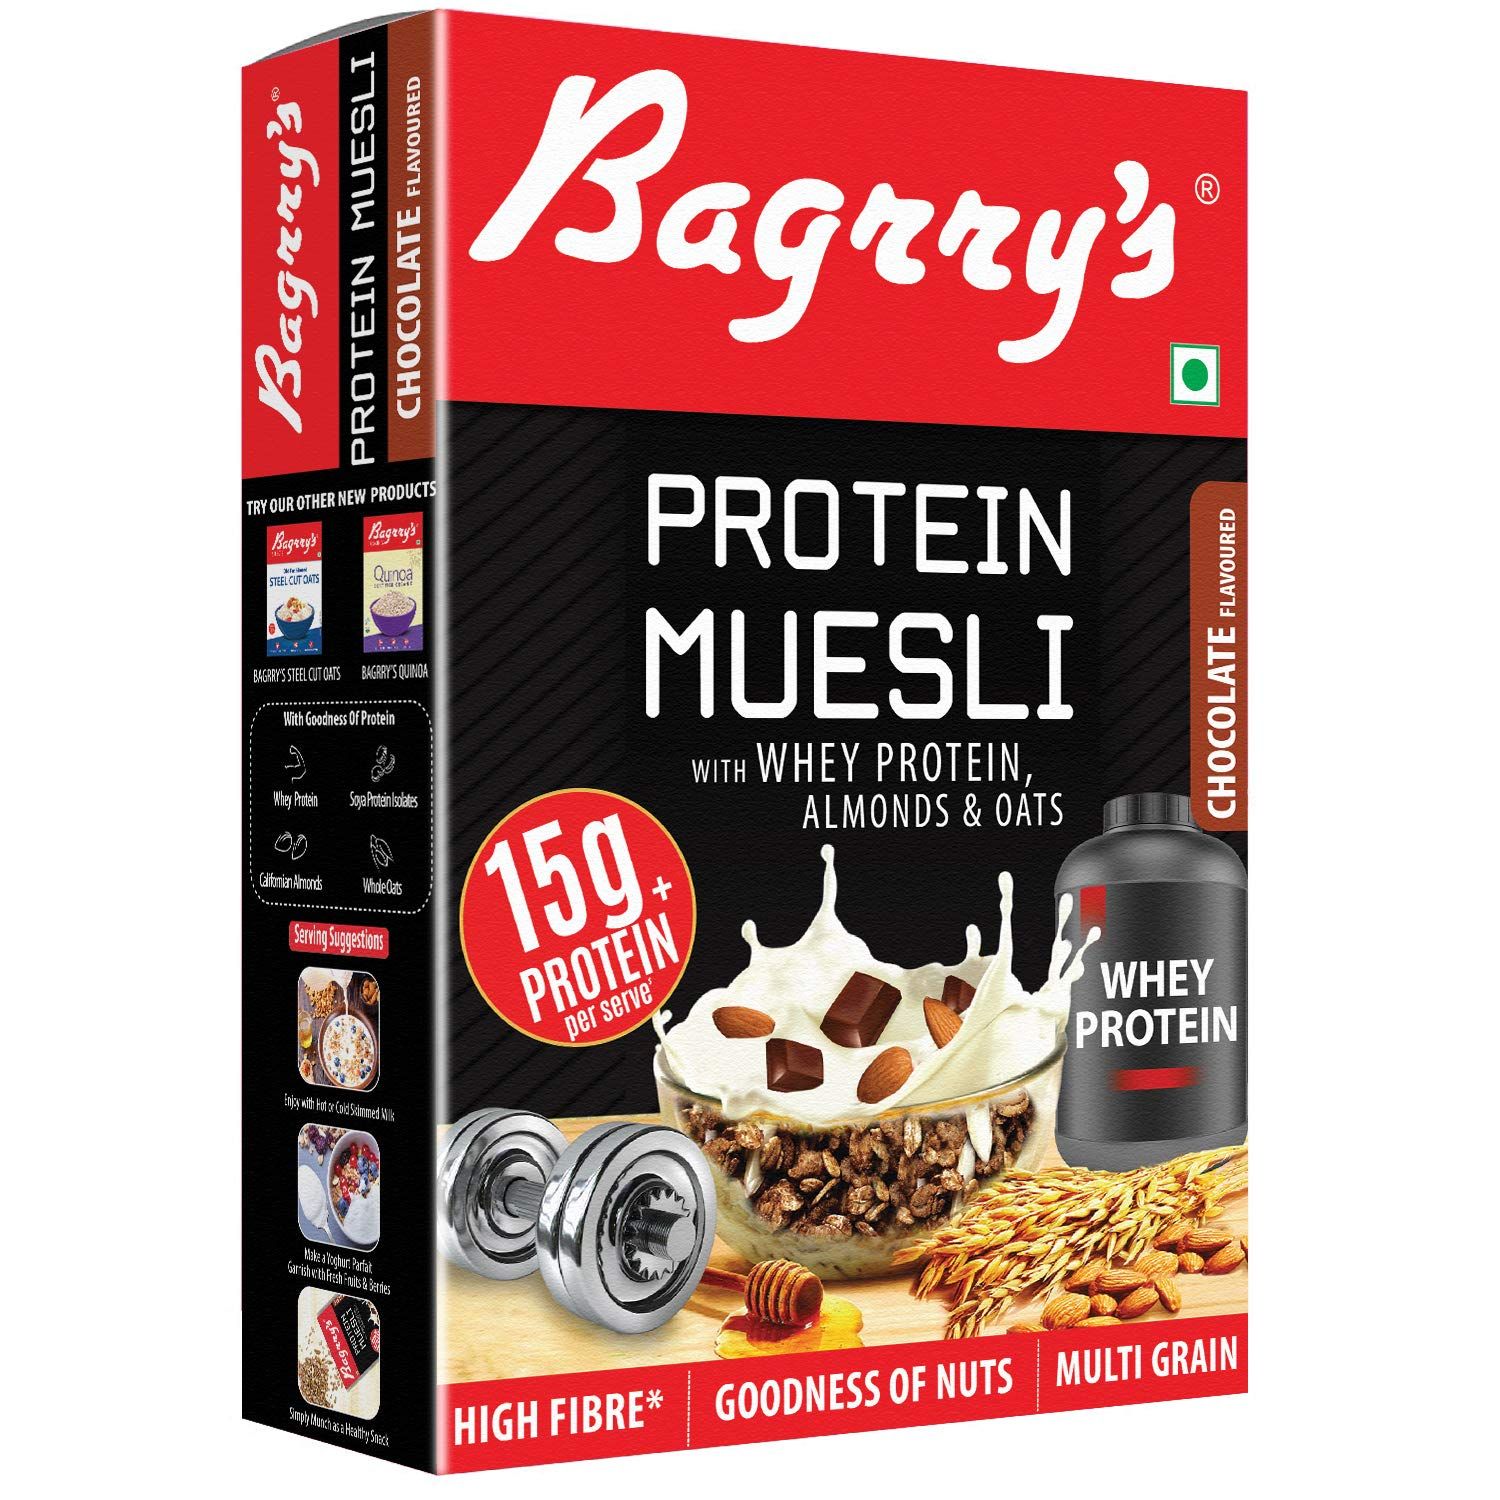 Bagrry's Protein Muesli With Whey Protein Almonds And Oats Chocolate Flavoured Image